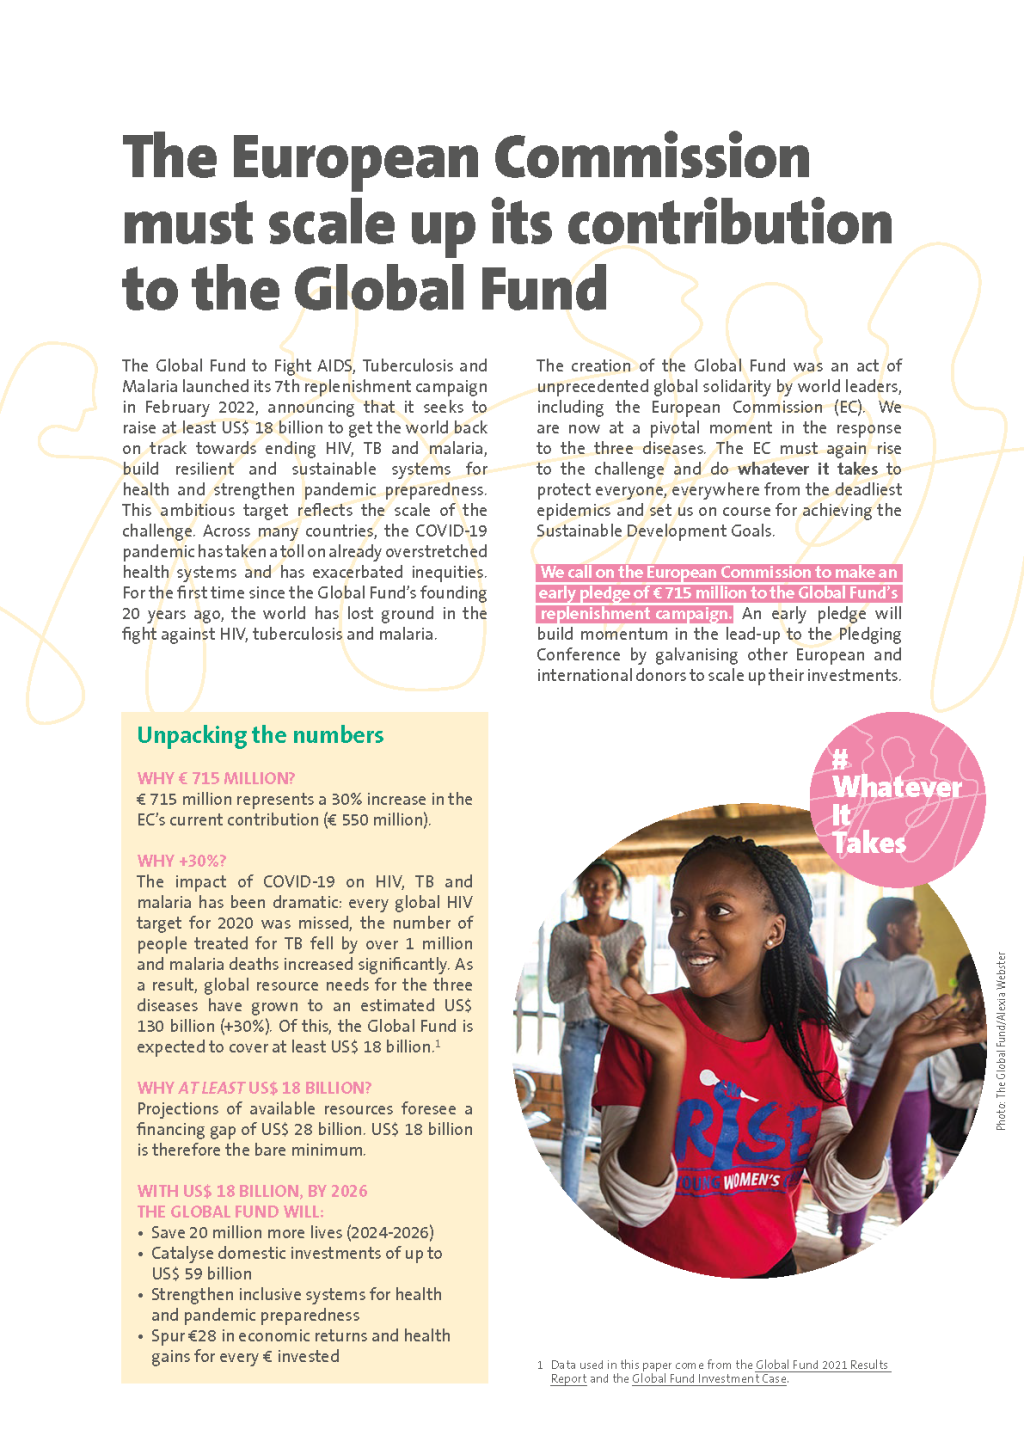 The-EU-must-scale-up-its-contribution-to-the-Global-Fund---C